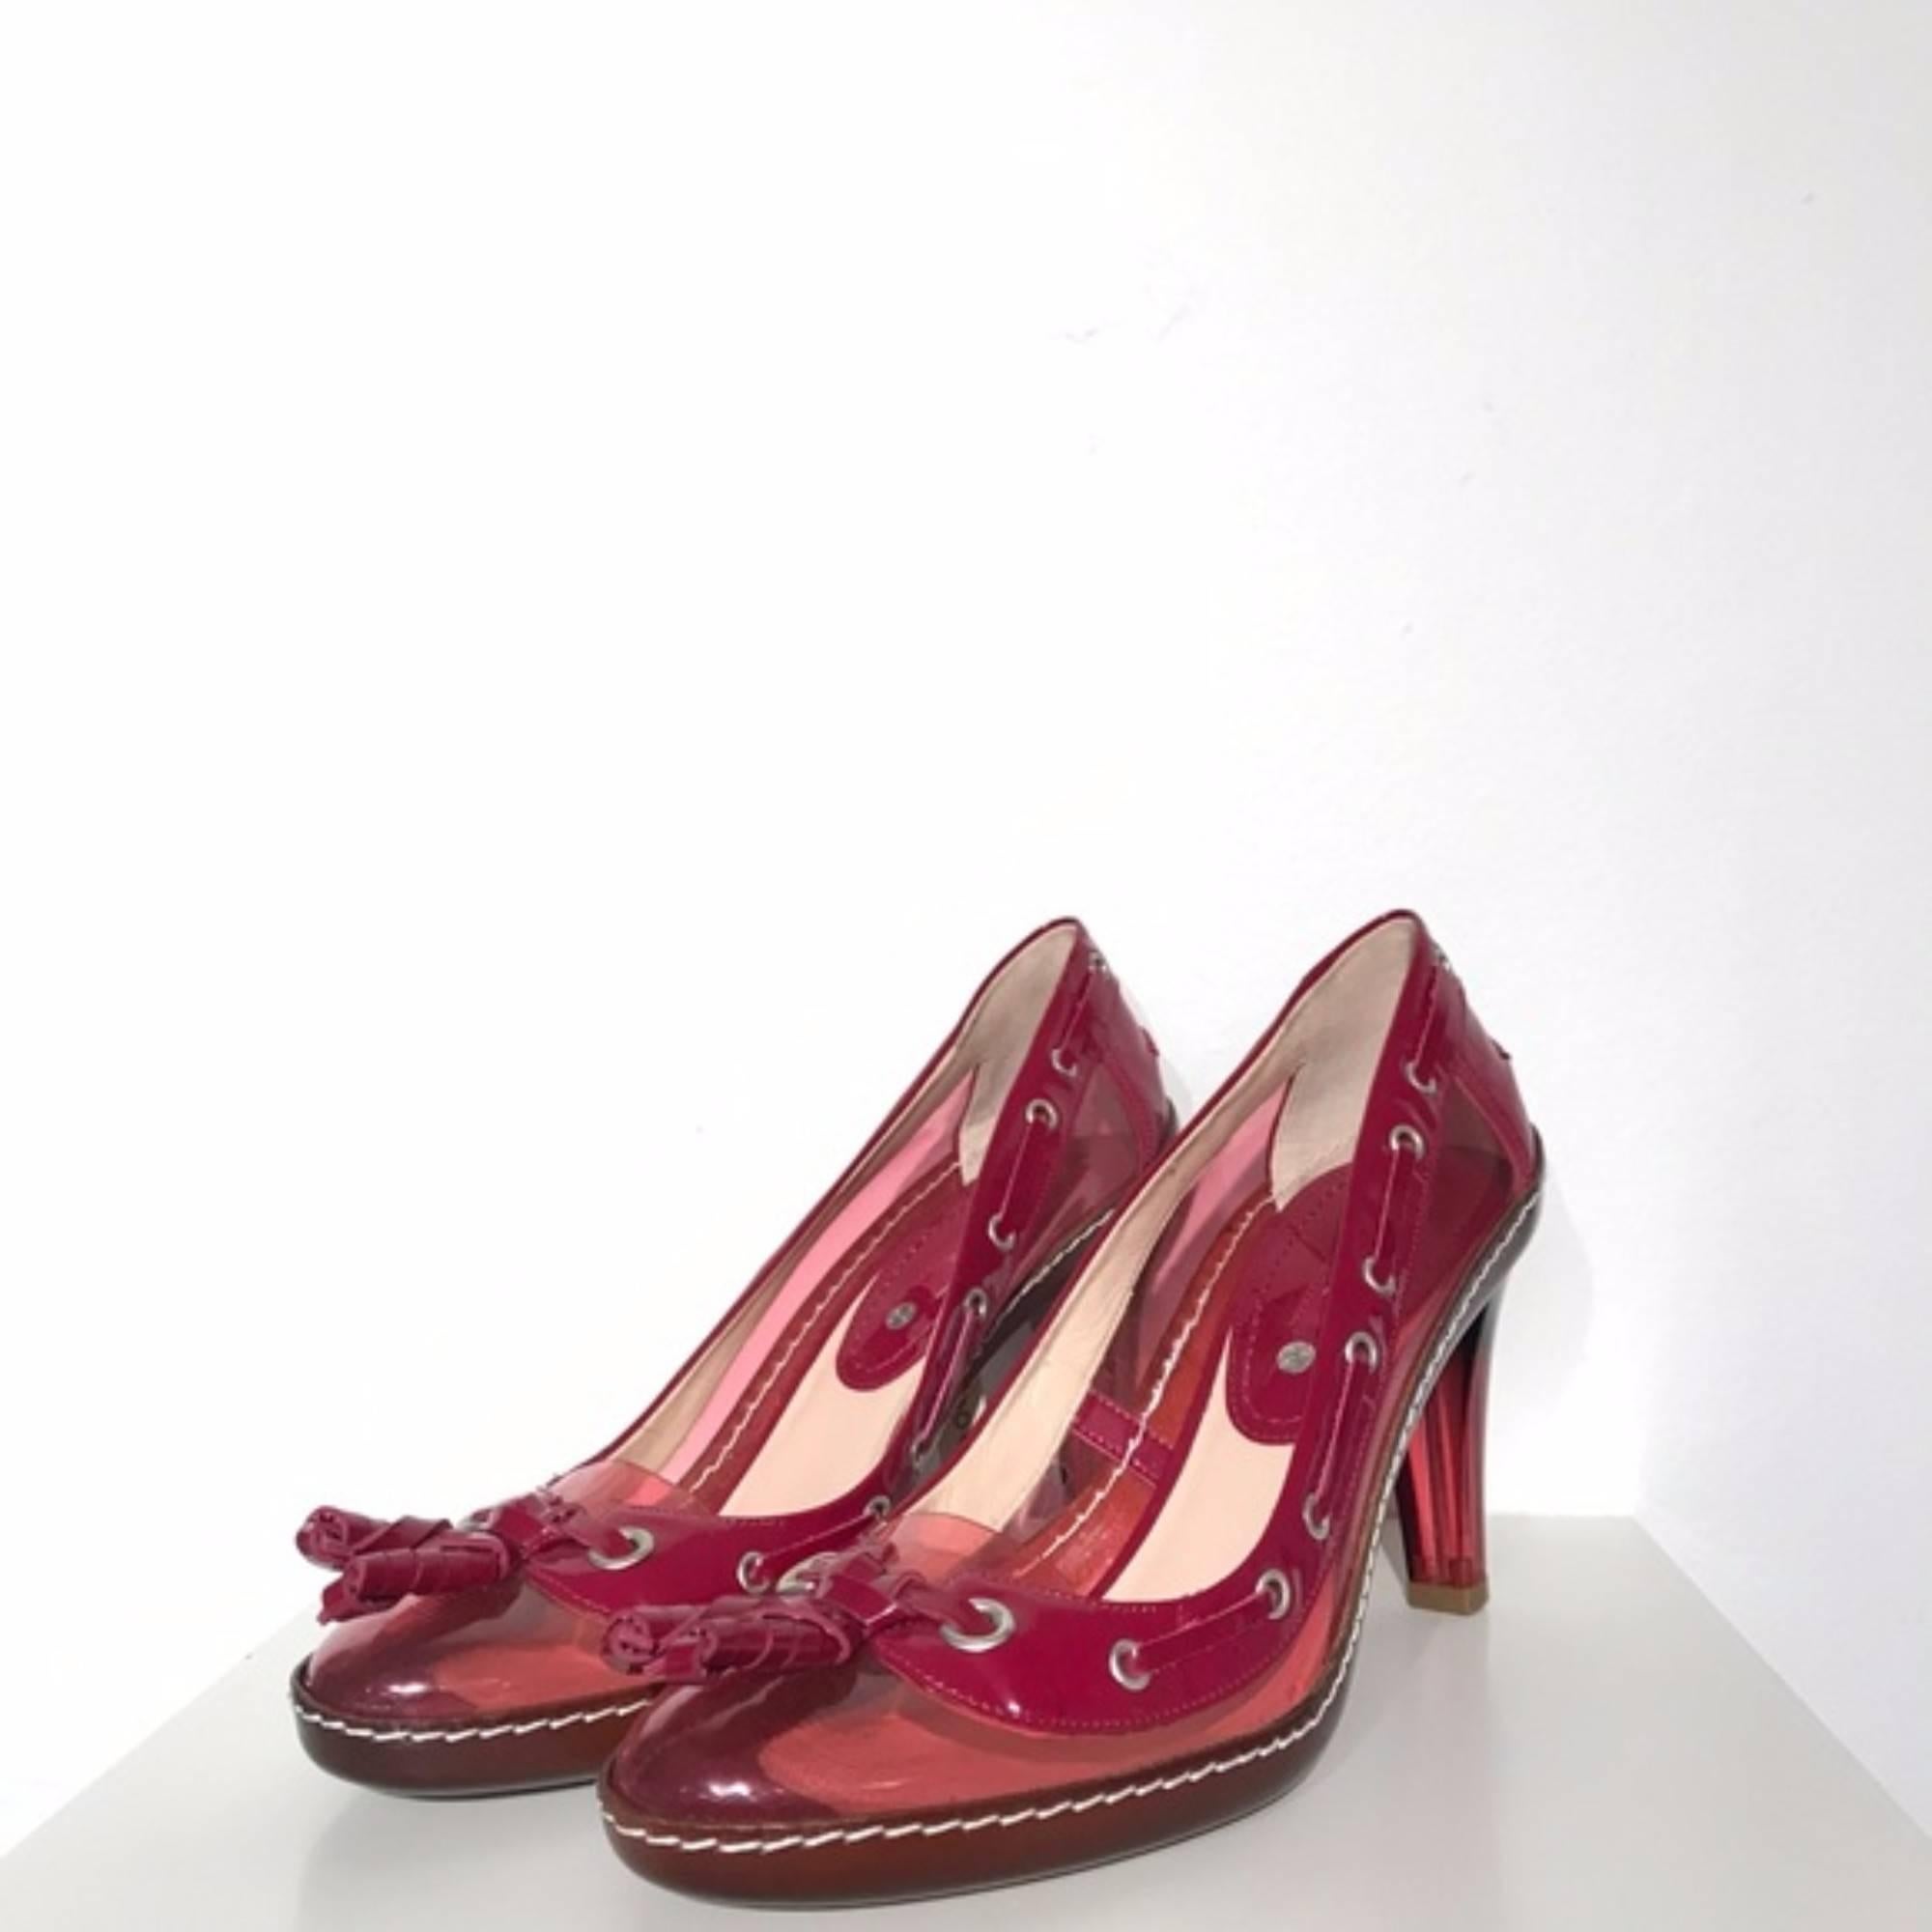 Celine Magenta Pumps 80 NIB Heels (Pink, Size - 7)
Brand new with box. Size 37. Heel size 80cm. Made in Italy.